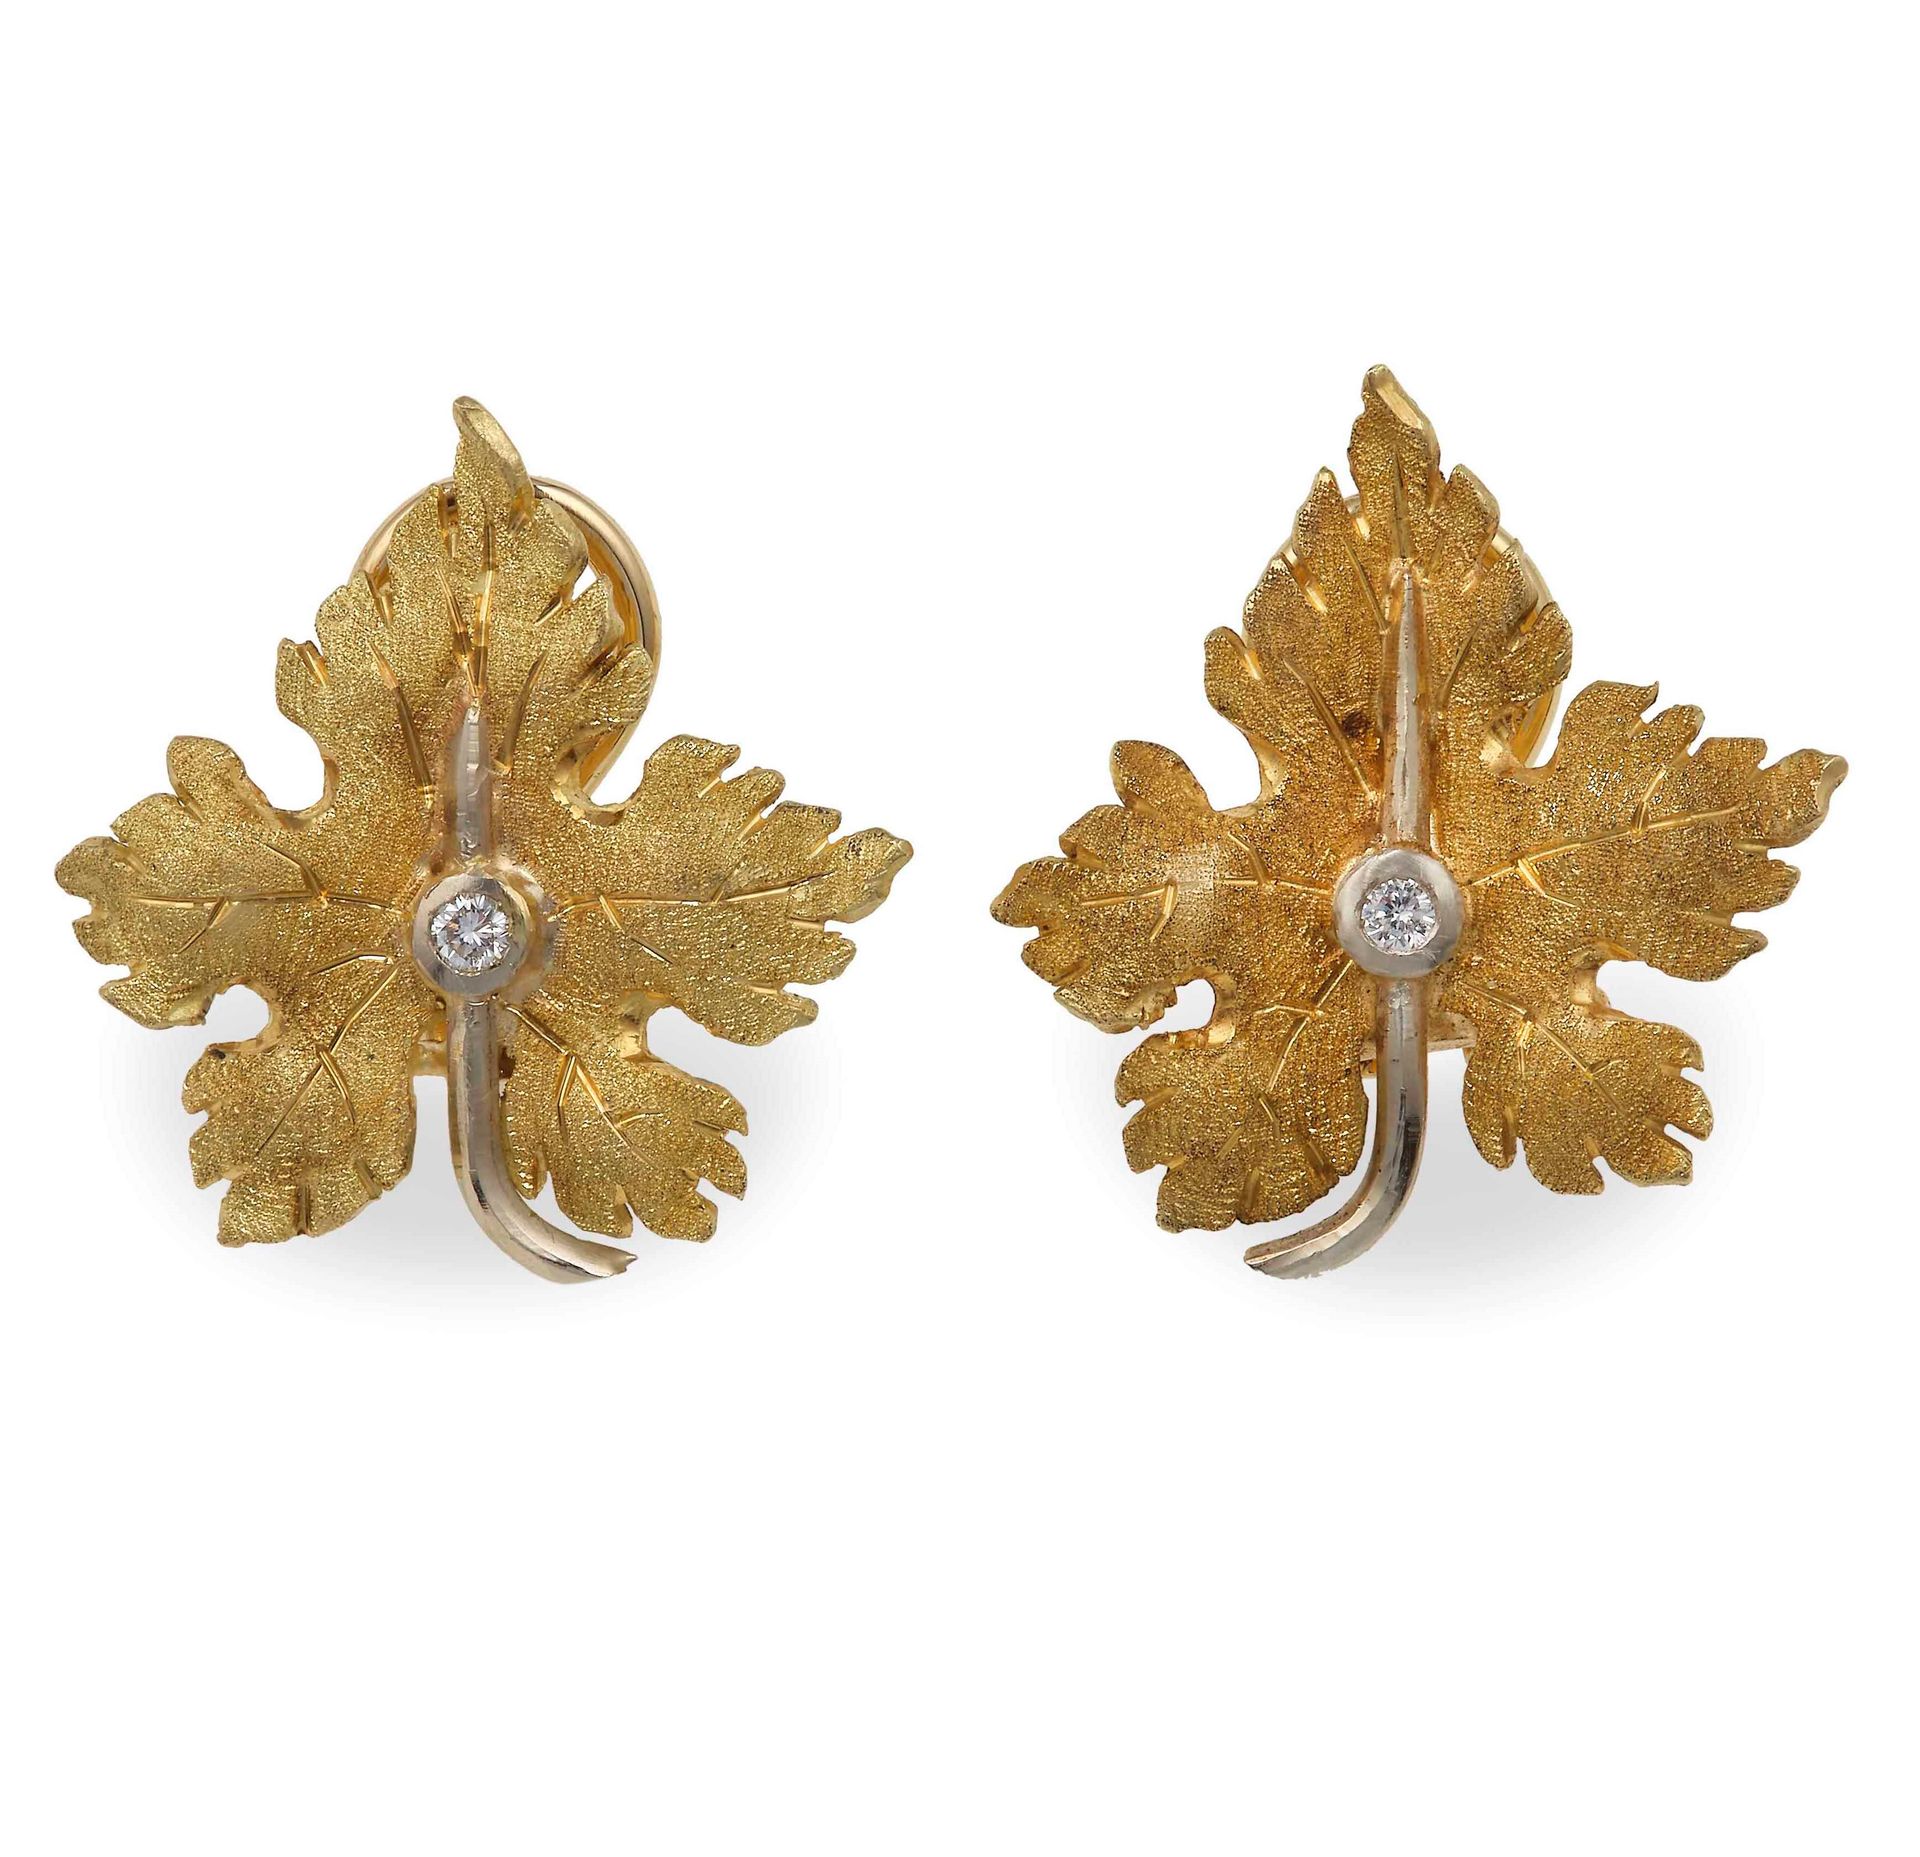 Pair of gold and diamond earrings. Signed M. Buccellati Smooth and satin-finishe&hellip;